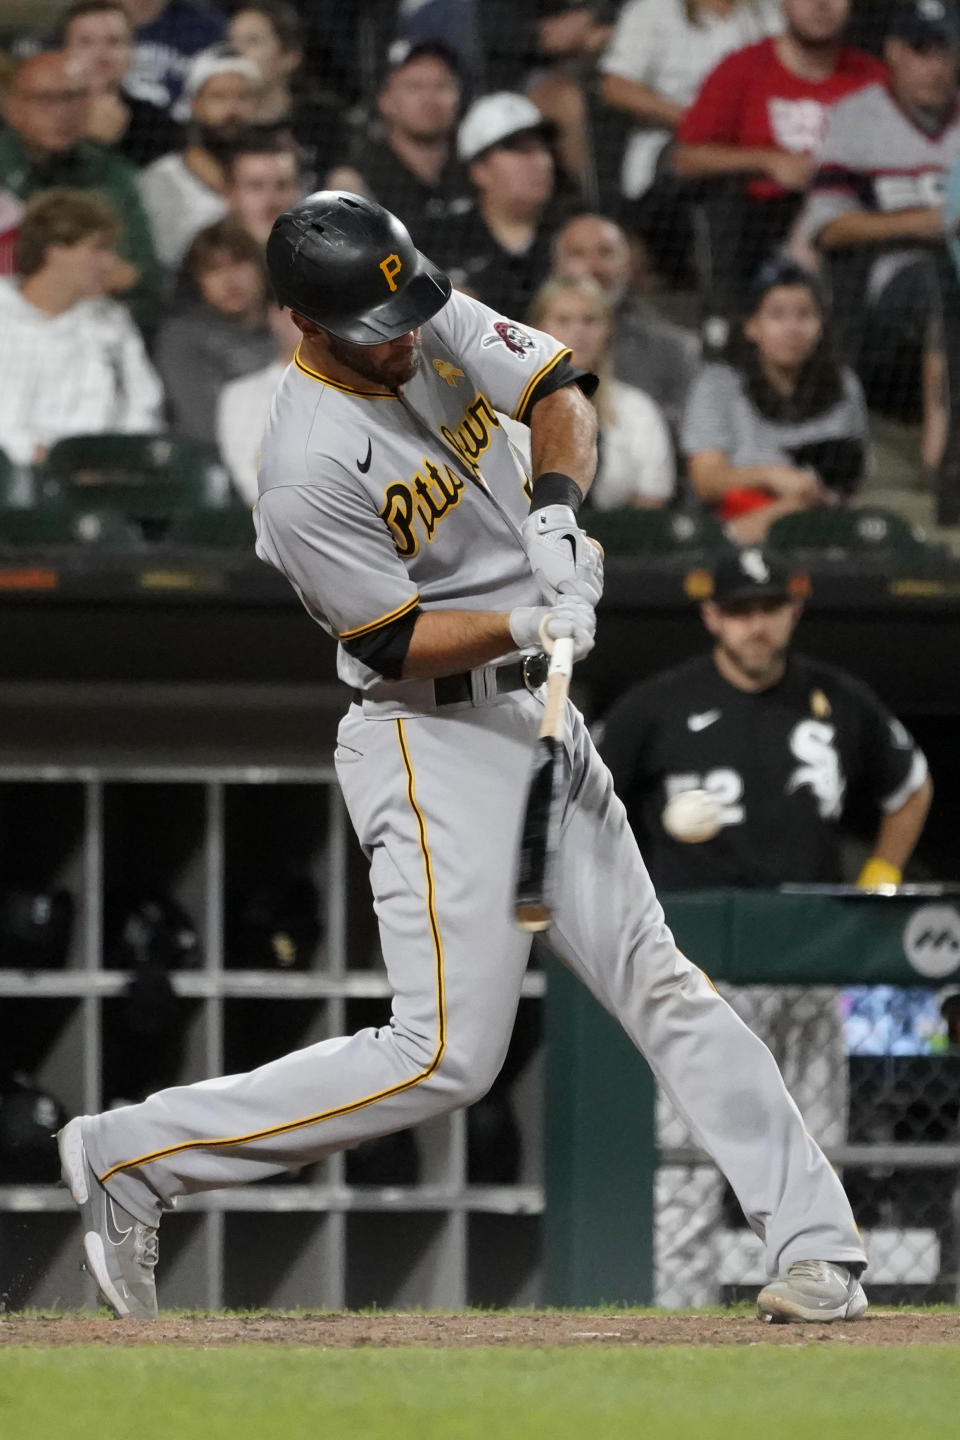 Pittsburgh Pirates' Jacob Stallings hits an RBI single off Chicago White Sox relief pitcher Liam Hendriks during the eighth inning of a baseball game Wednesday, Sept. 1, 2021, in Chicago. (AP Photo/Charles Rex Arbogast)